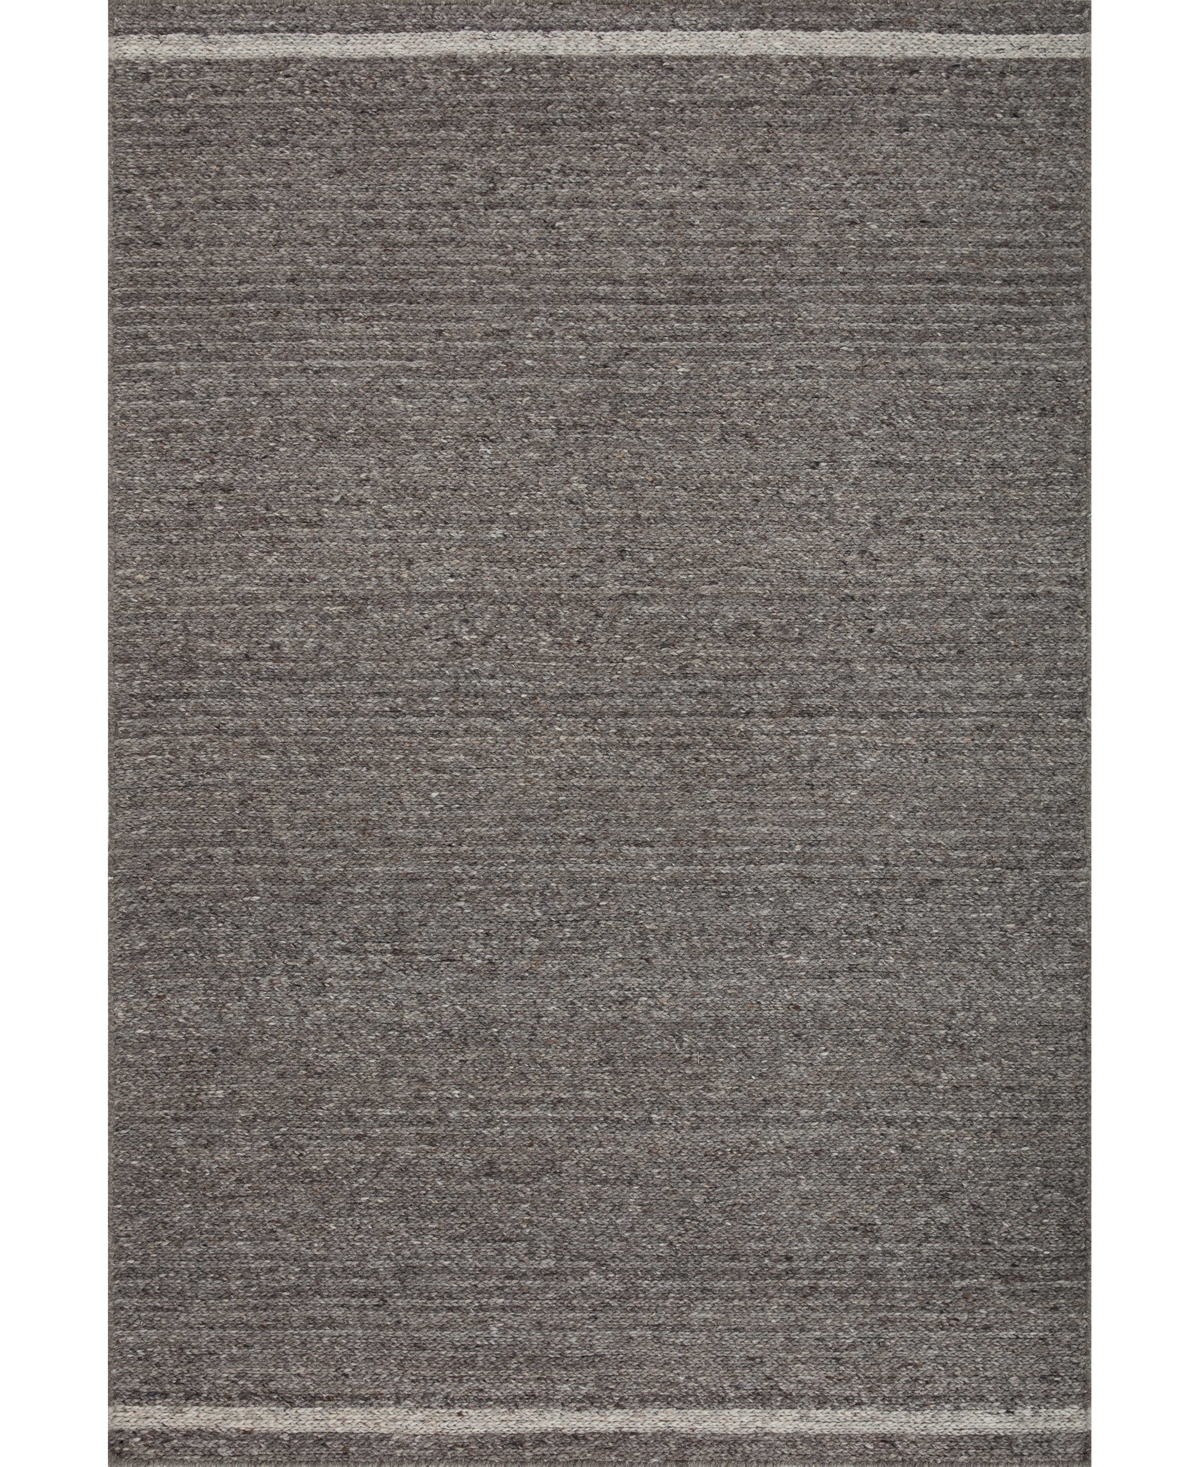 Magnolia Home By Joanna Gaines X Loloi Ashby Ash-02 7'9" X 9'9" Area Rug In Charcoal